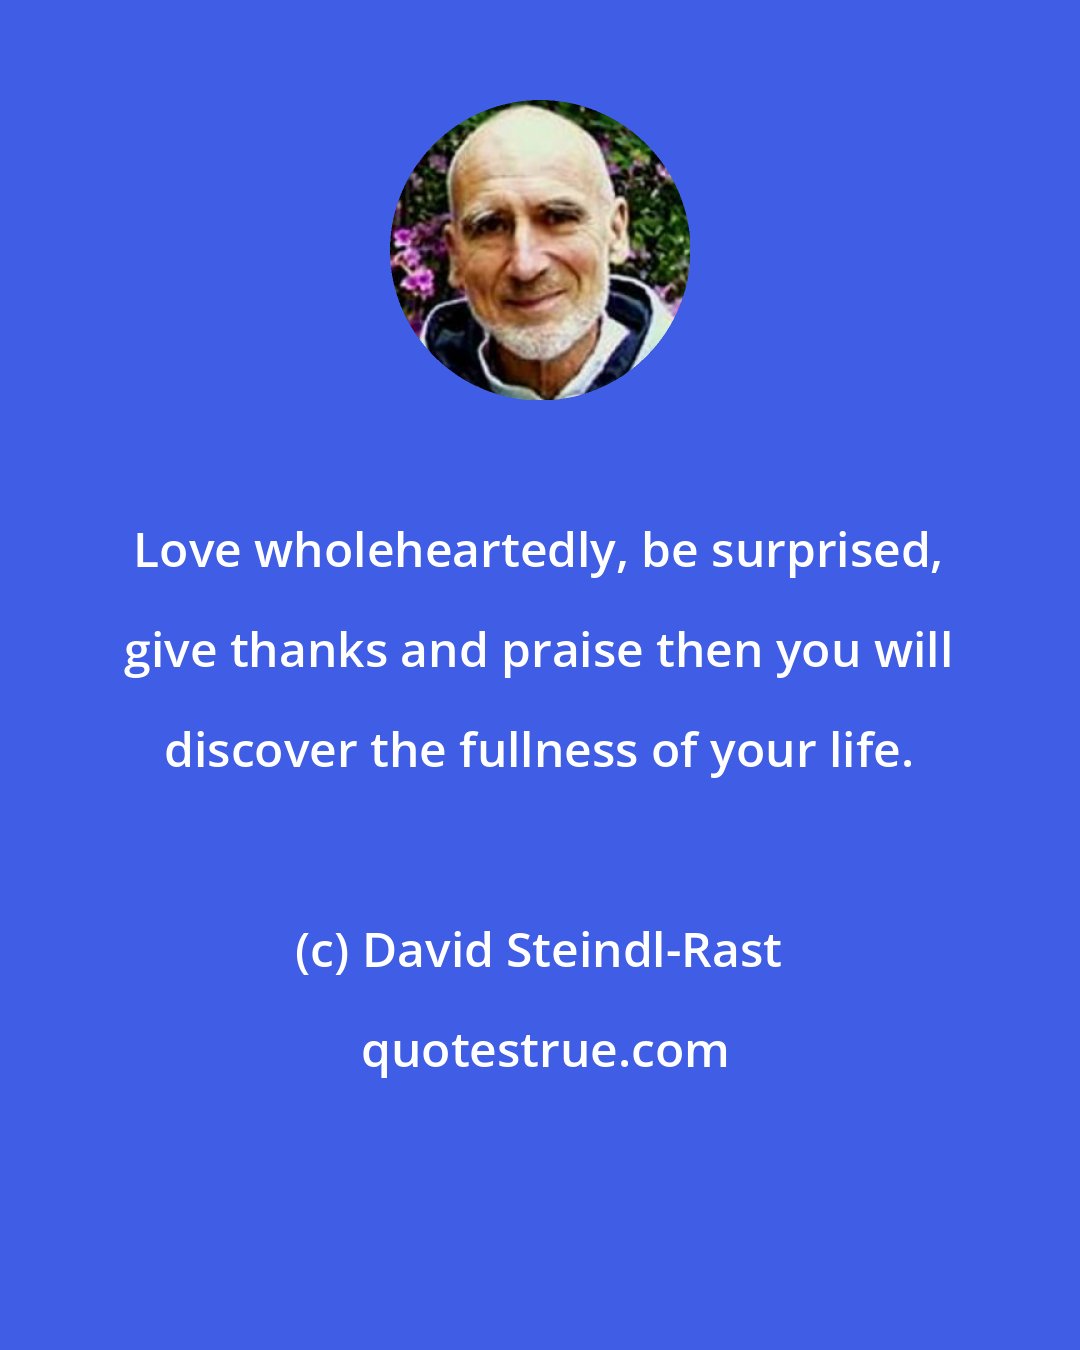 David Steindl-Rast: Love wholeheartedly, be surprised, give thanks and praise then you will discover the fullness of your life.